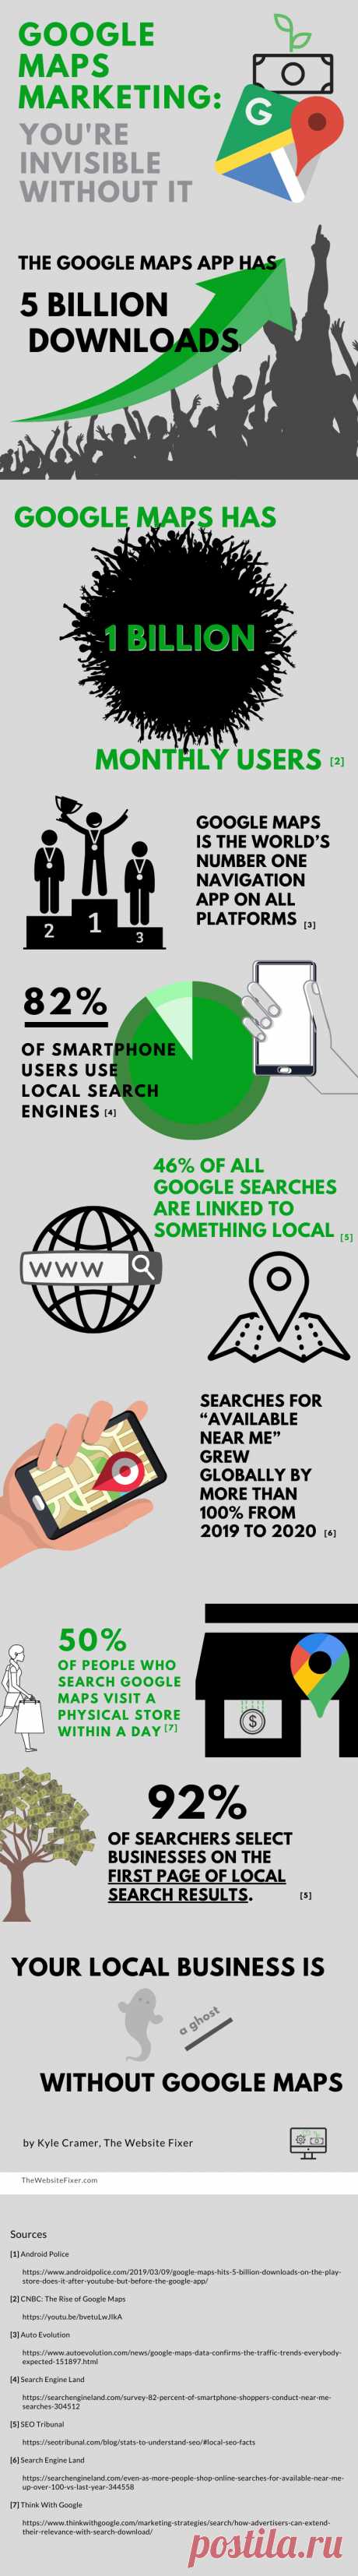 8 Google Maps Stats Every Business Owner & Marketer Should Know In 2021